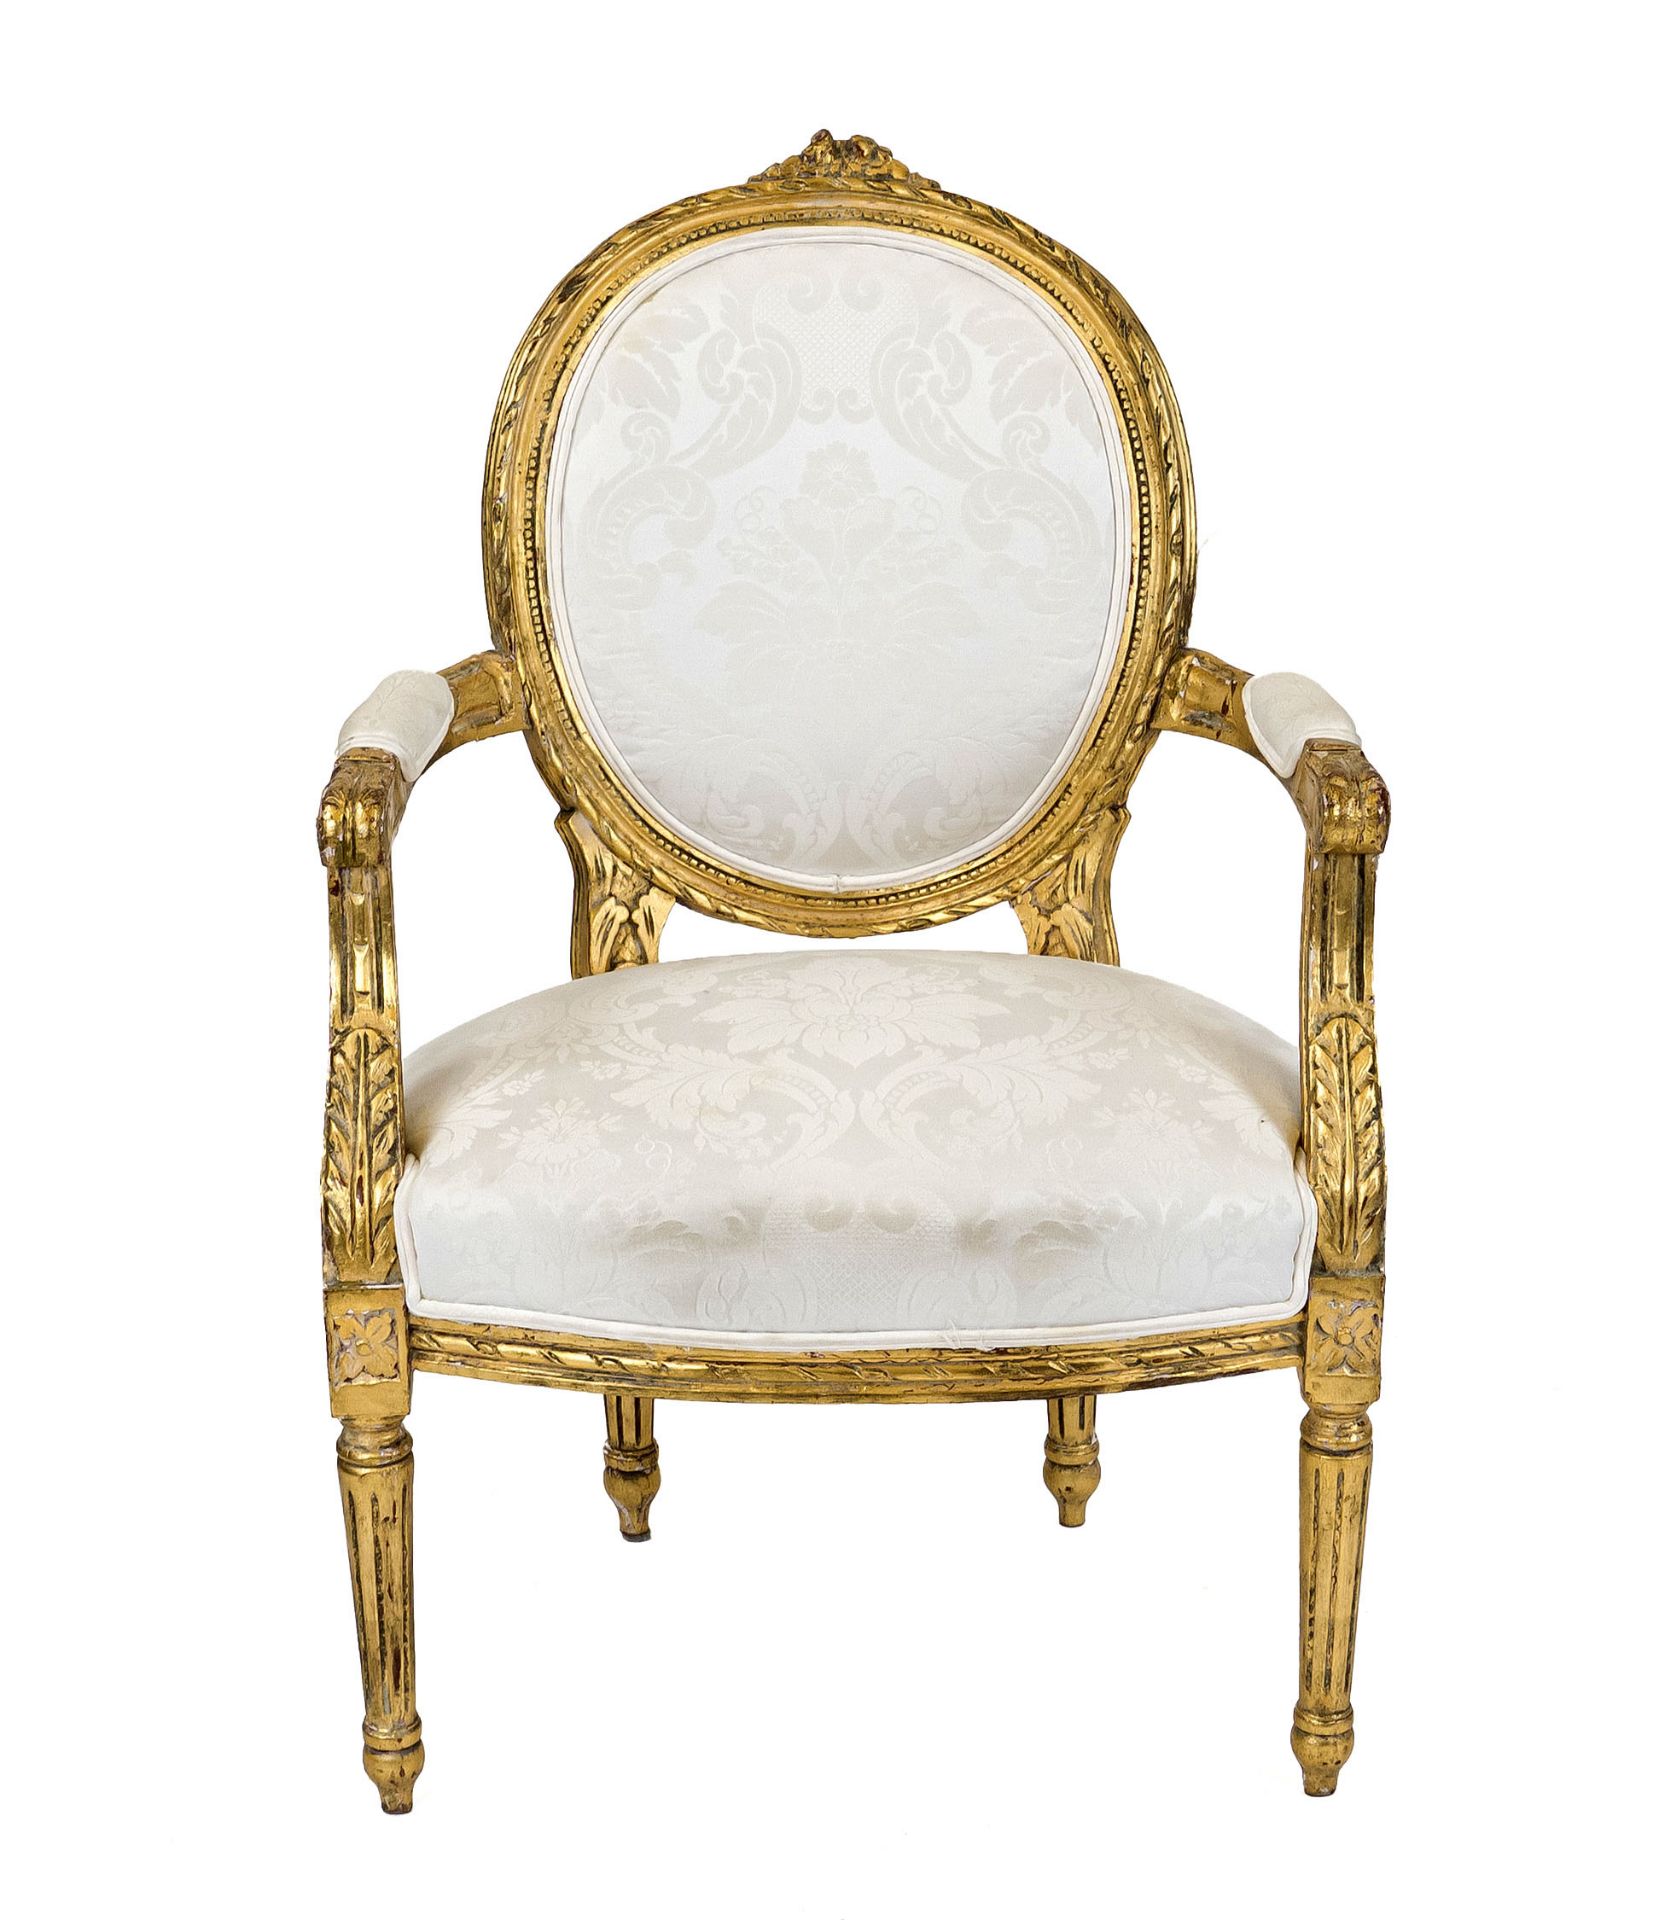 Louis-Seize style armchair, 19th century, carved and gilded beech wood, fluted, tapering legs, - Image 2 of 3